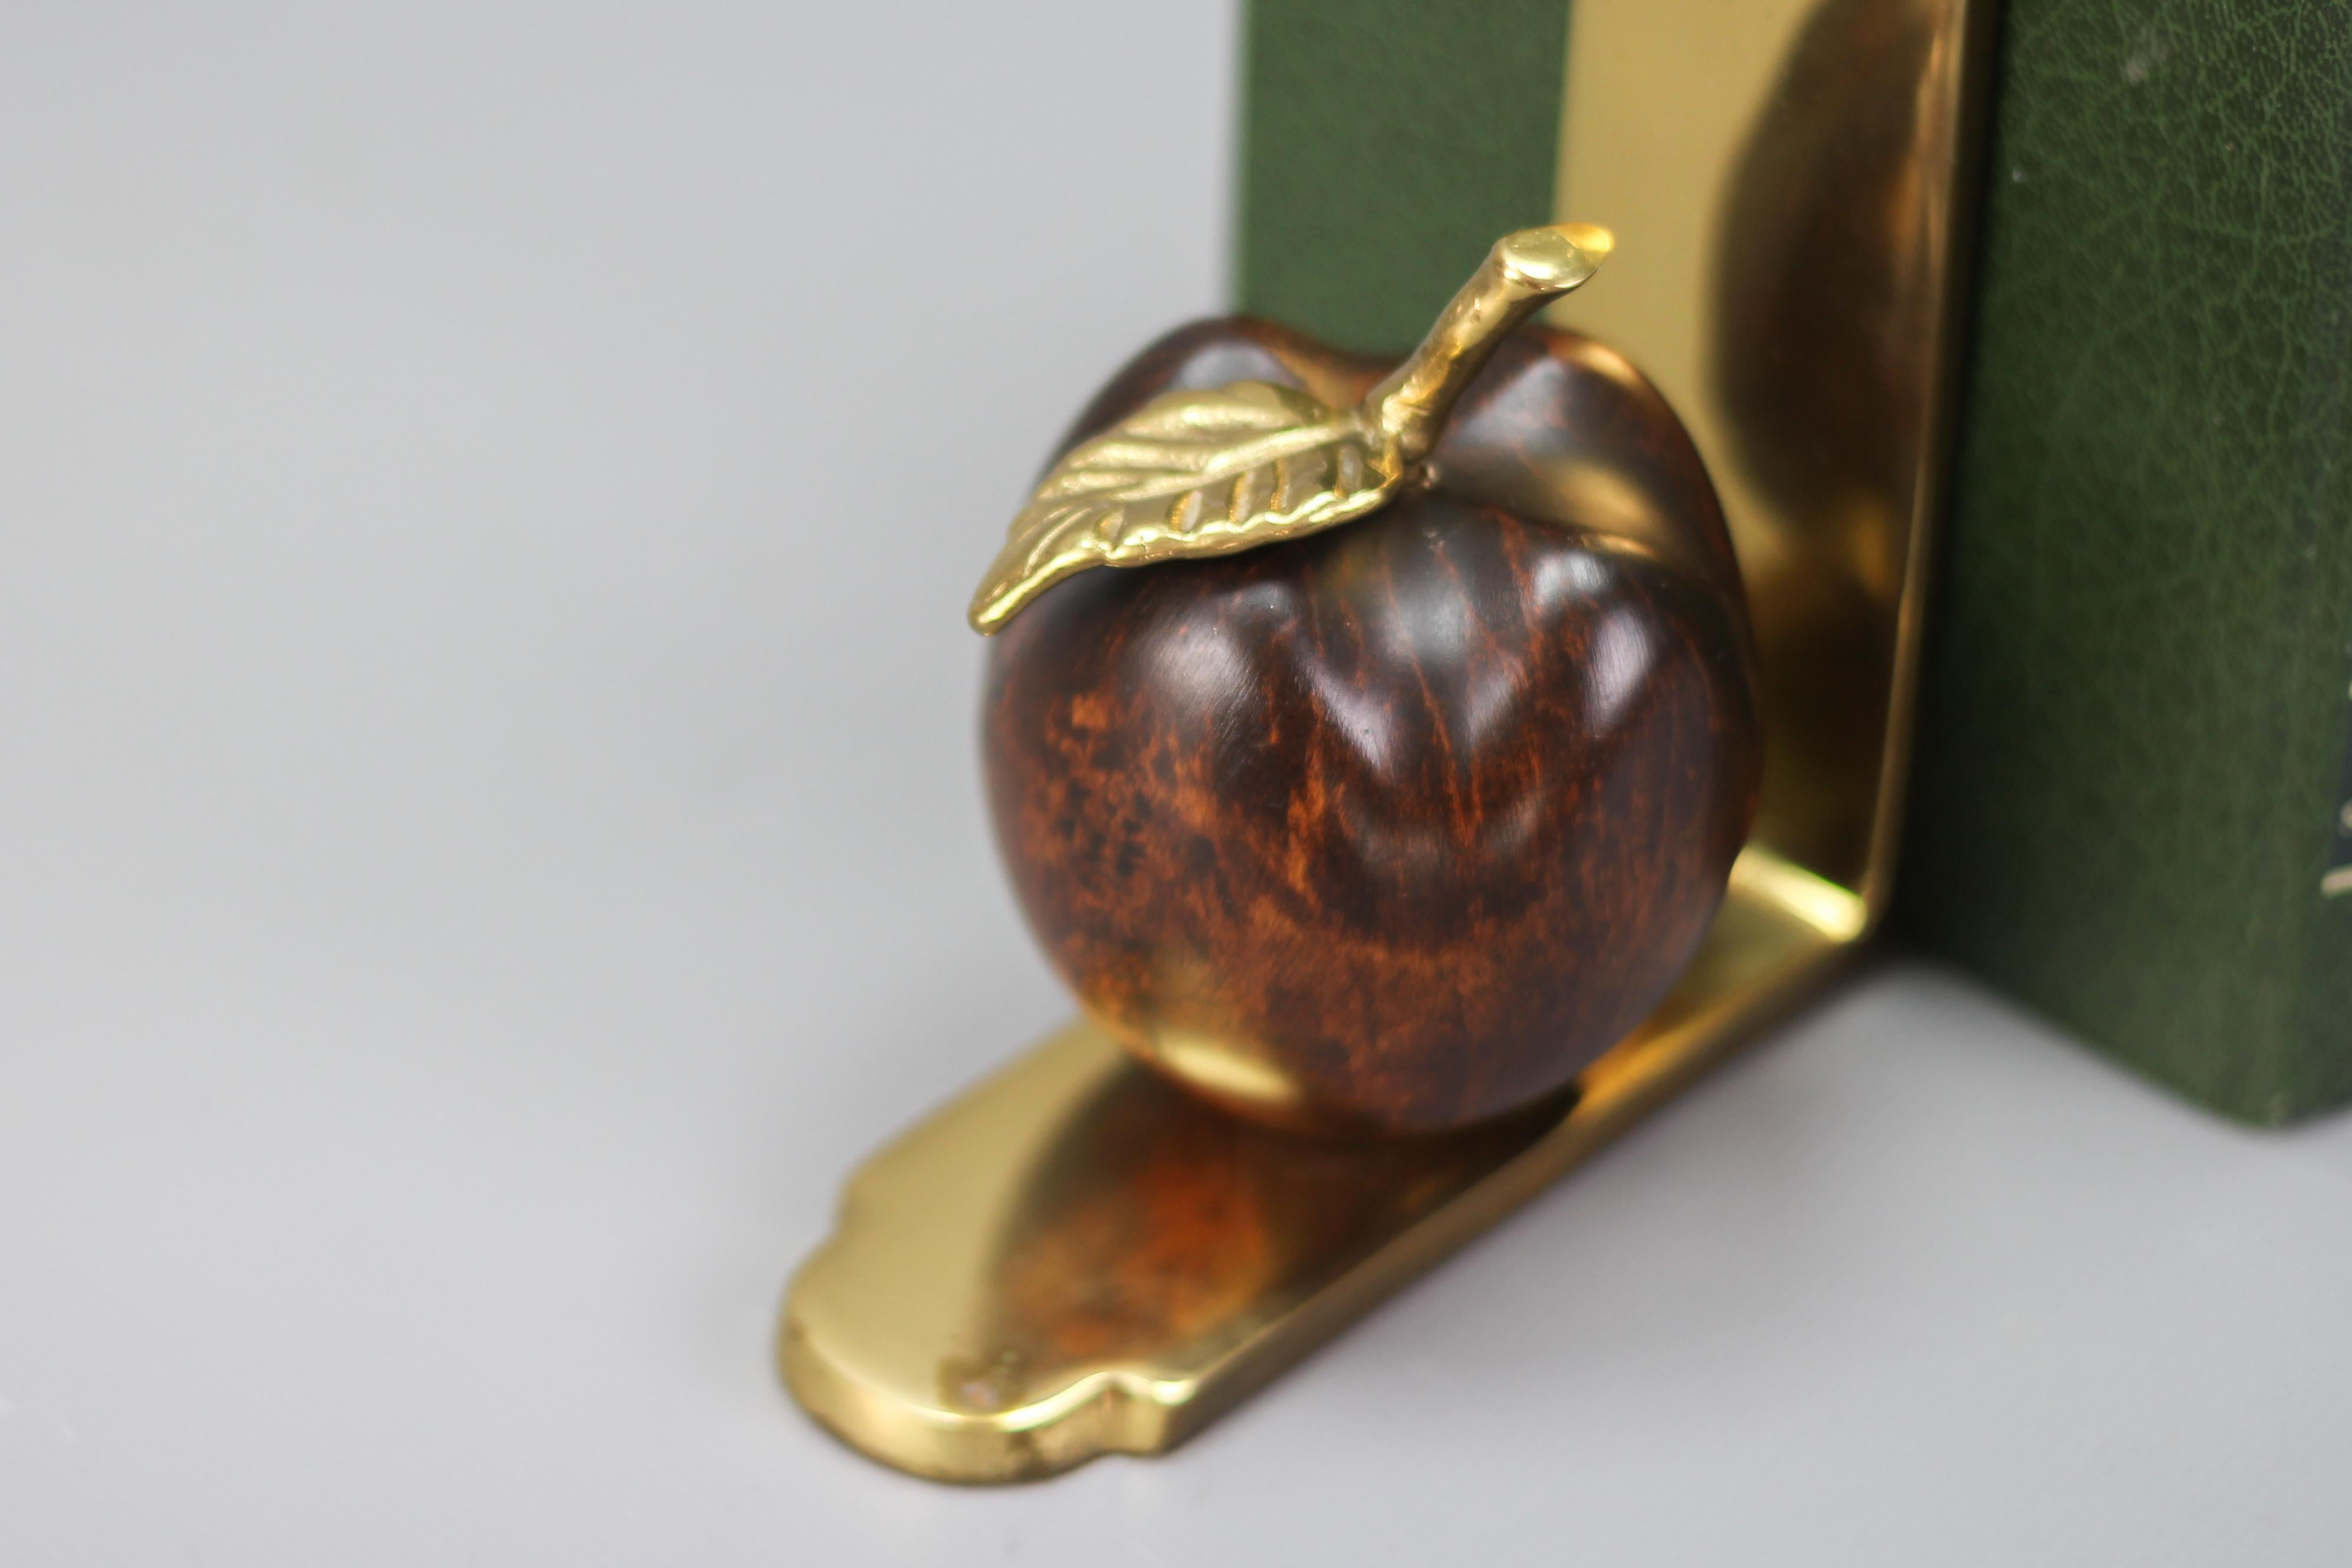 Vintage Brass and Wooden Apples Bookends For Sale 4